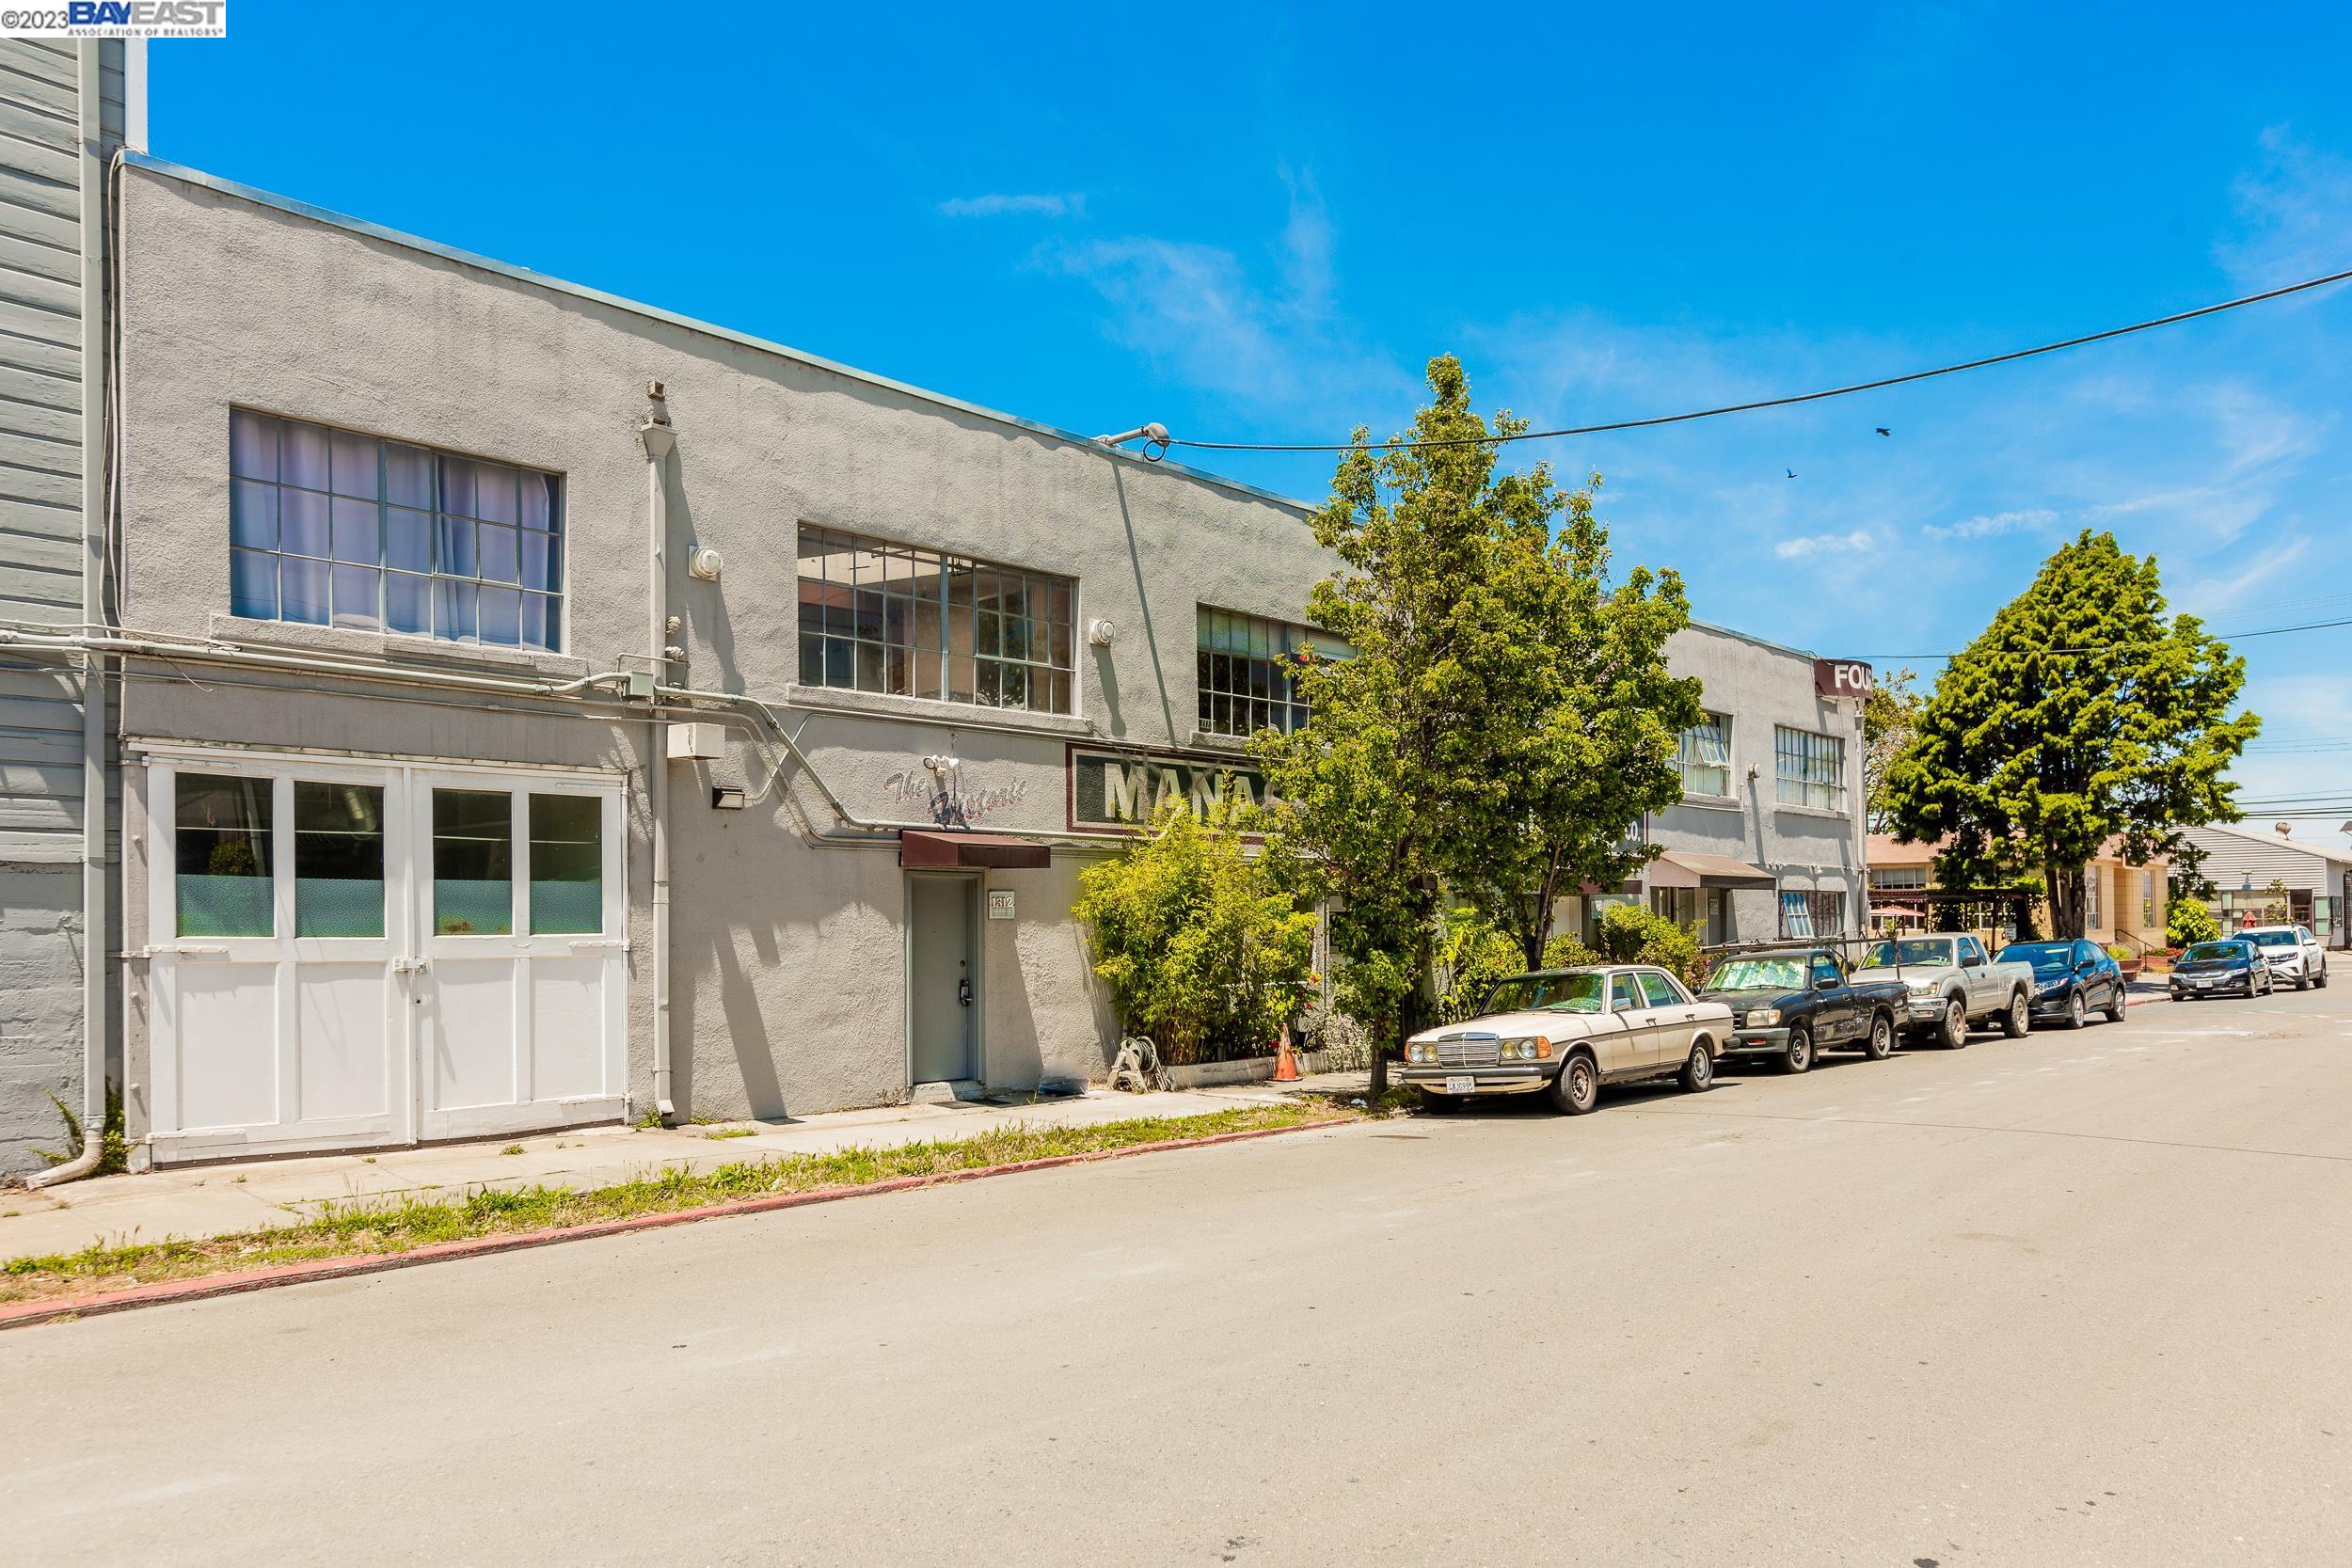 Great Opportunity to own this 2 story live-work space in the desirable 4th St neighborhood of Berkeley! Second floor would make ideal office space. The space can be used for manufacturing, wholesale trade, warehousing, or art studio Skylights brighten space, Great location with plenty of foot traffic and close to Hwy, restaurants and shops, Unit with kitchen and bath too, Come take a look to look at the possibilities!